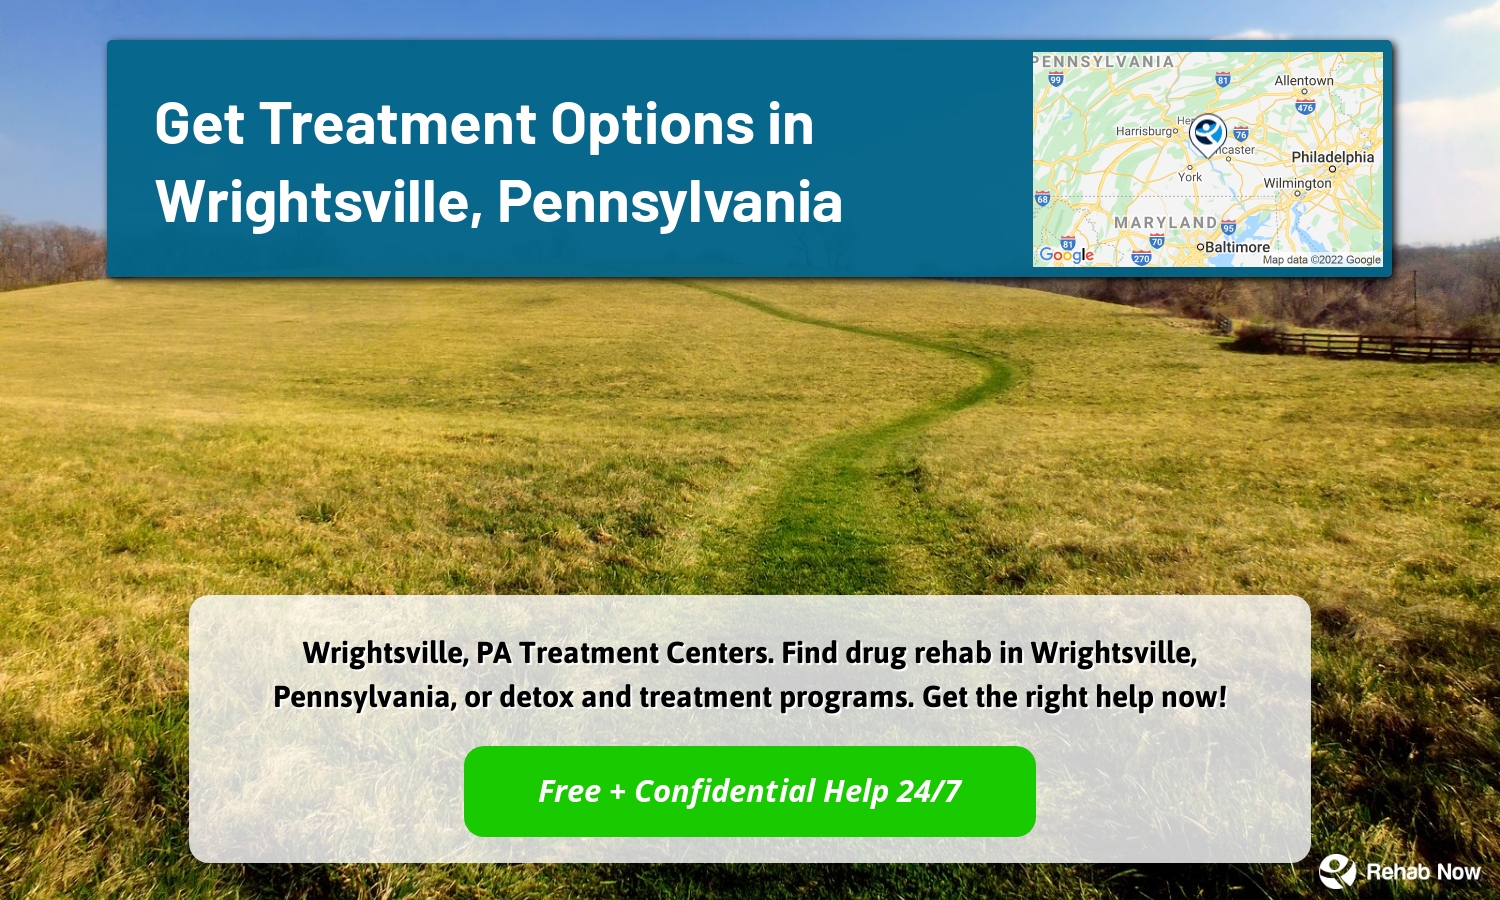 Wrightsville, PA Treatment Centers. Find drug rehab in Wrightsville, Pennsylvania, or detox and treatment programs. Get the right help now!